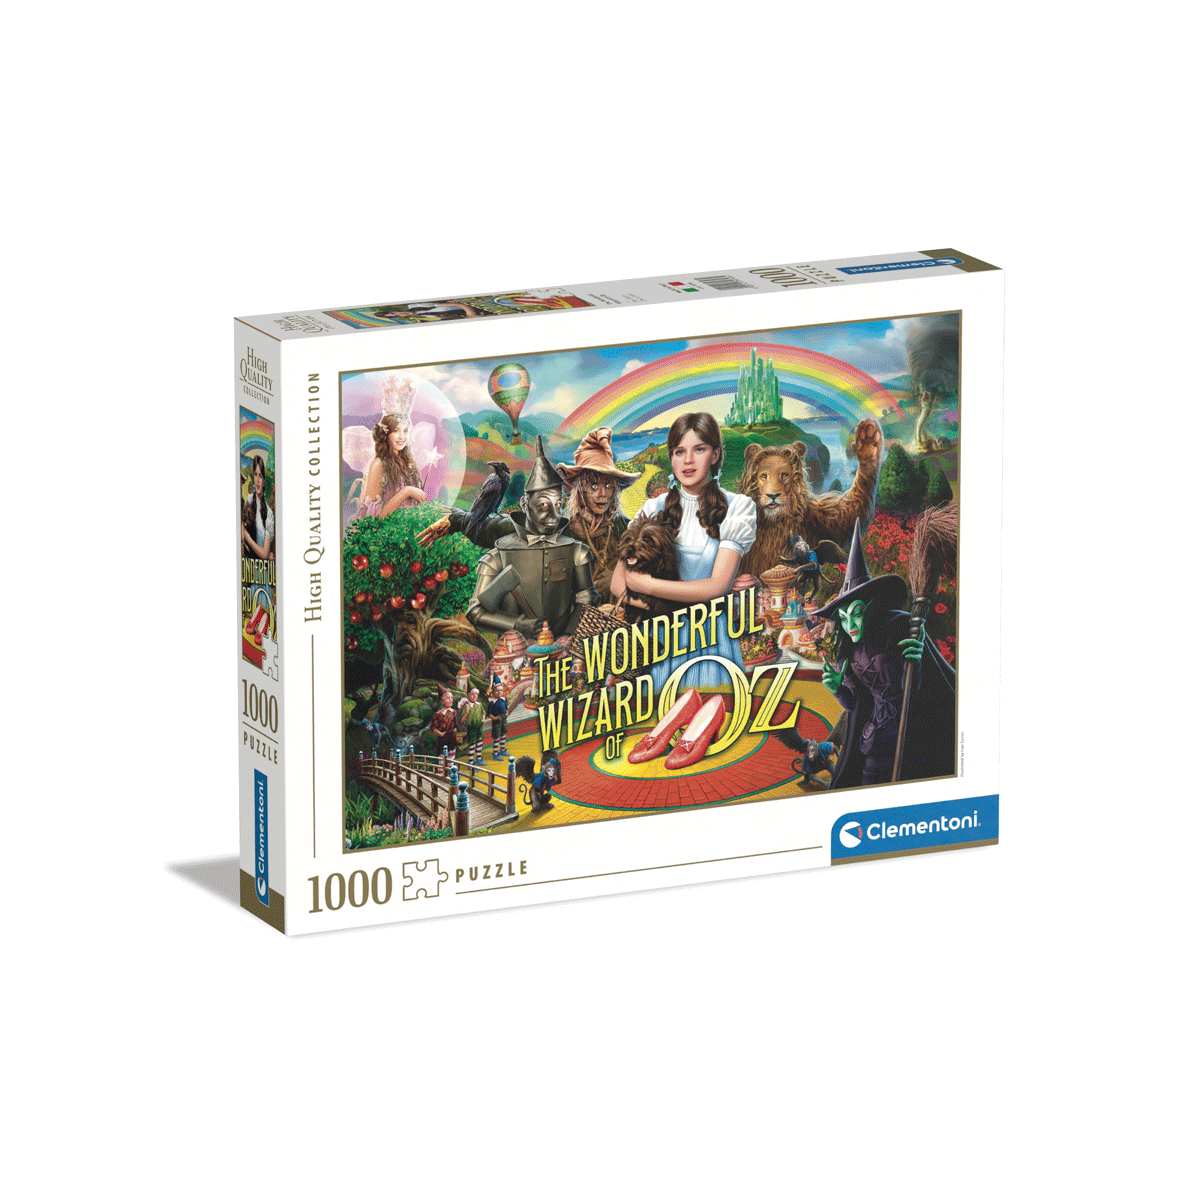 Clementoni puzzle high quality collection - the wonderful wizard of oz - 1000 pezzi, puzzle adulti - CLEMENTONI